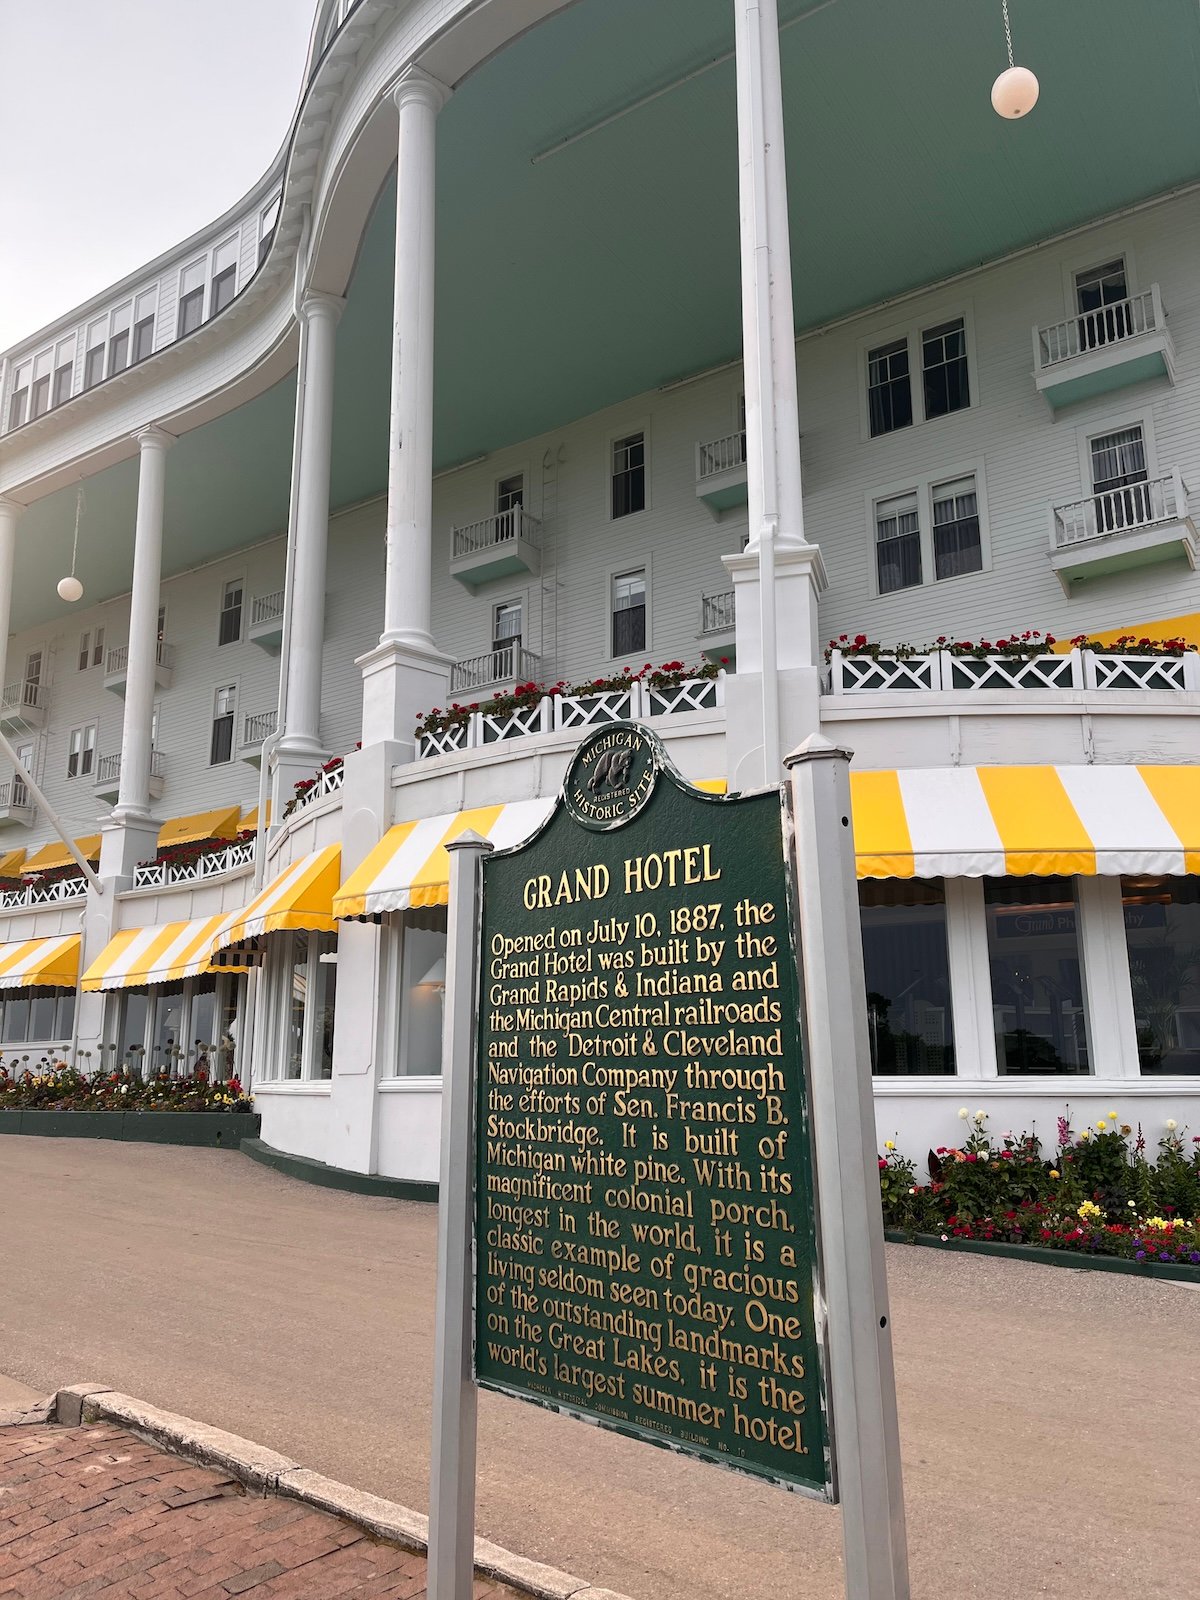 A photo depicting the Grand Hotel's sign on Mackinac Island.